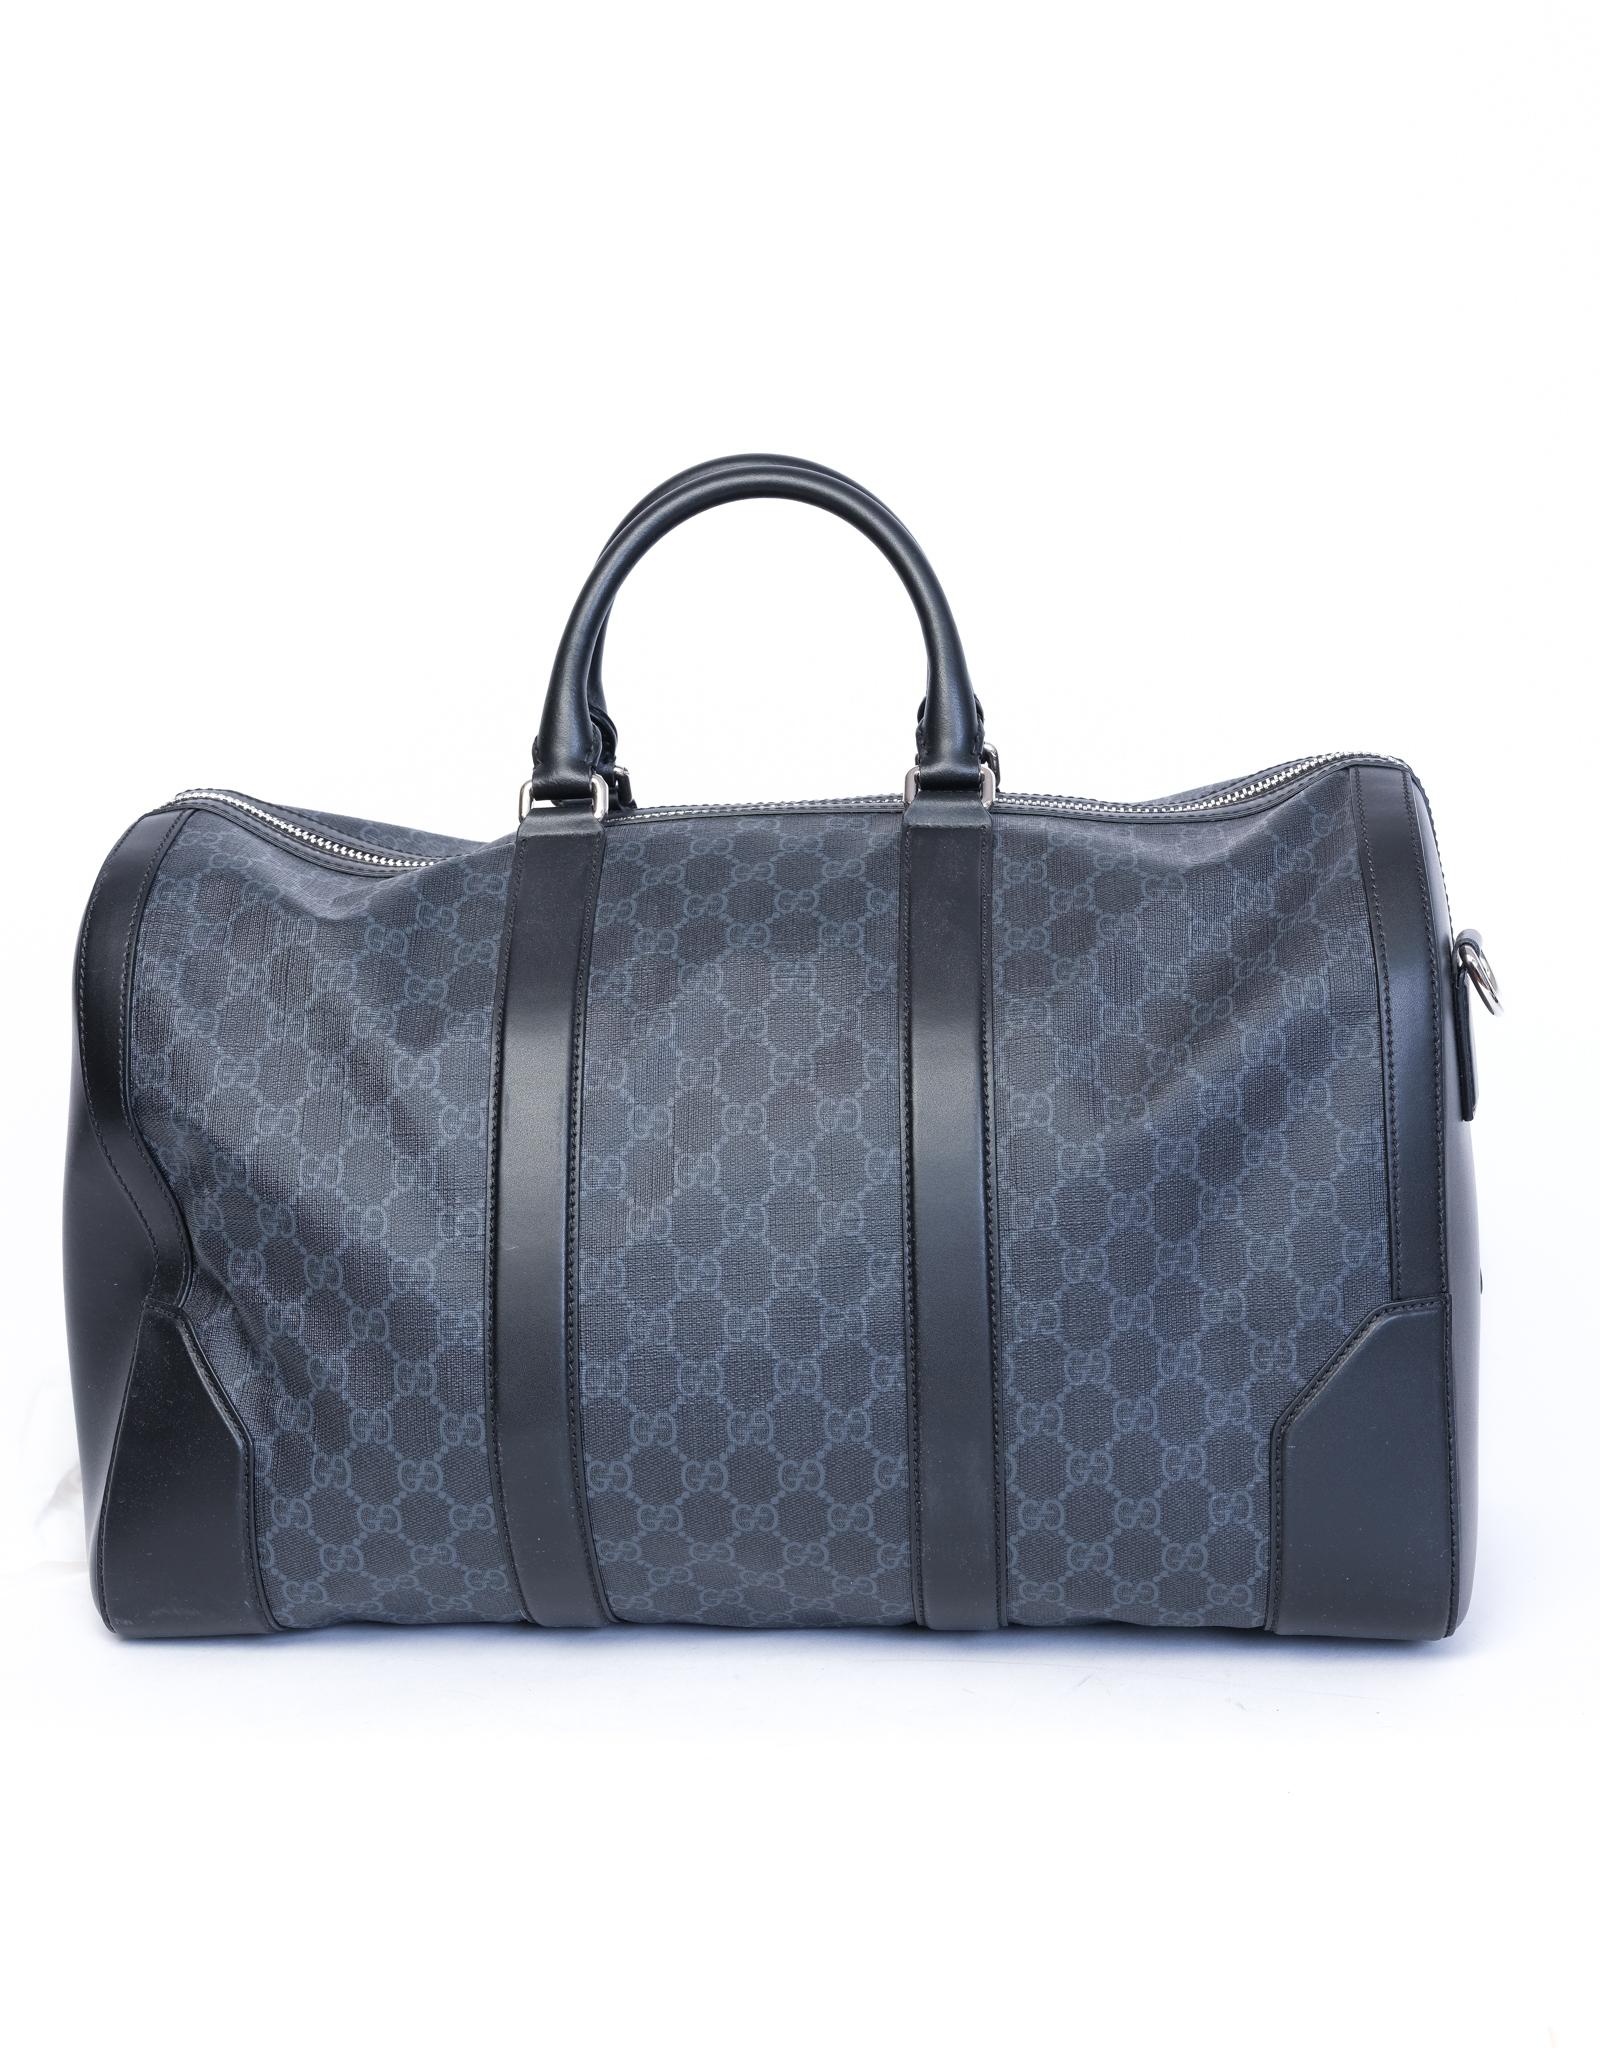 This Gucci Duffle is made of canvas with the GG Supreme print and black leather finishes. Featuring round top handles, a detachable and adjustable shoulder strap, top double zip closure and black woven interior lining with a large open internal